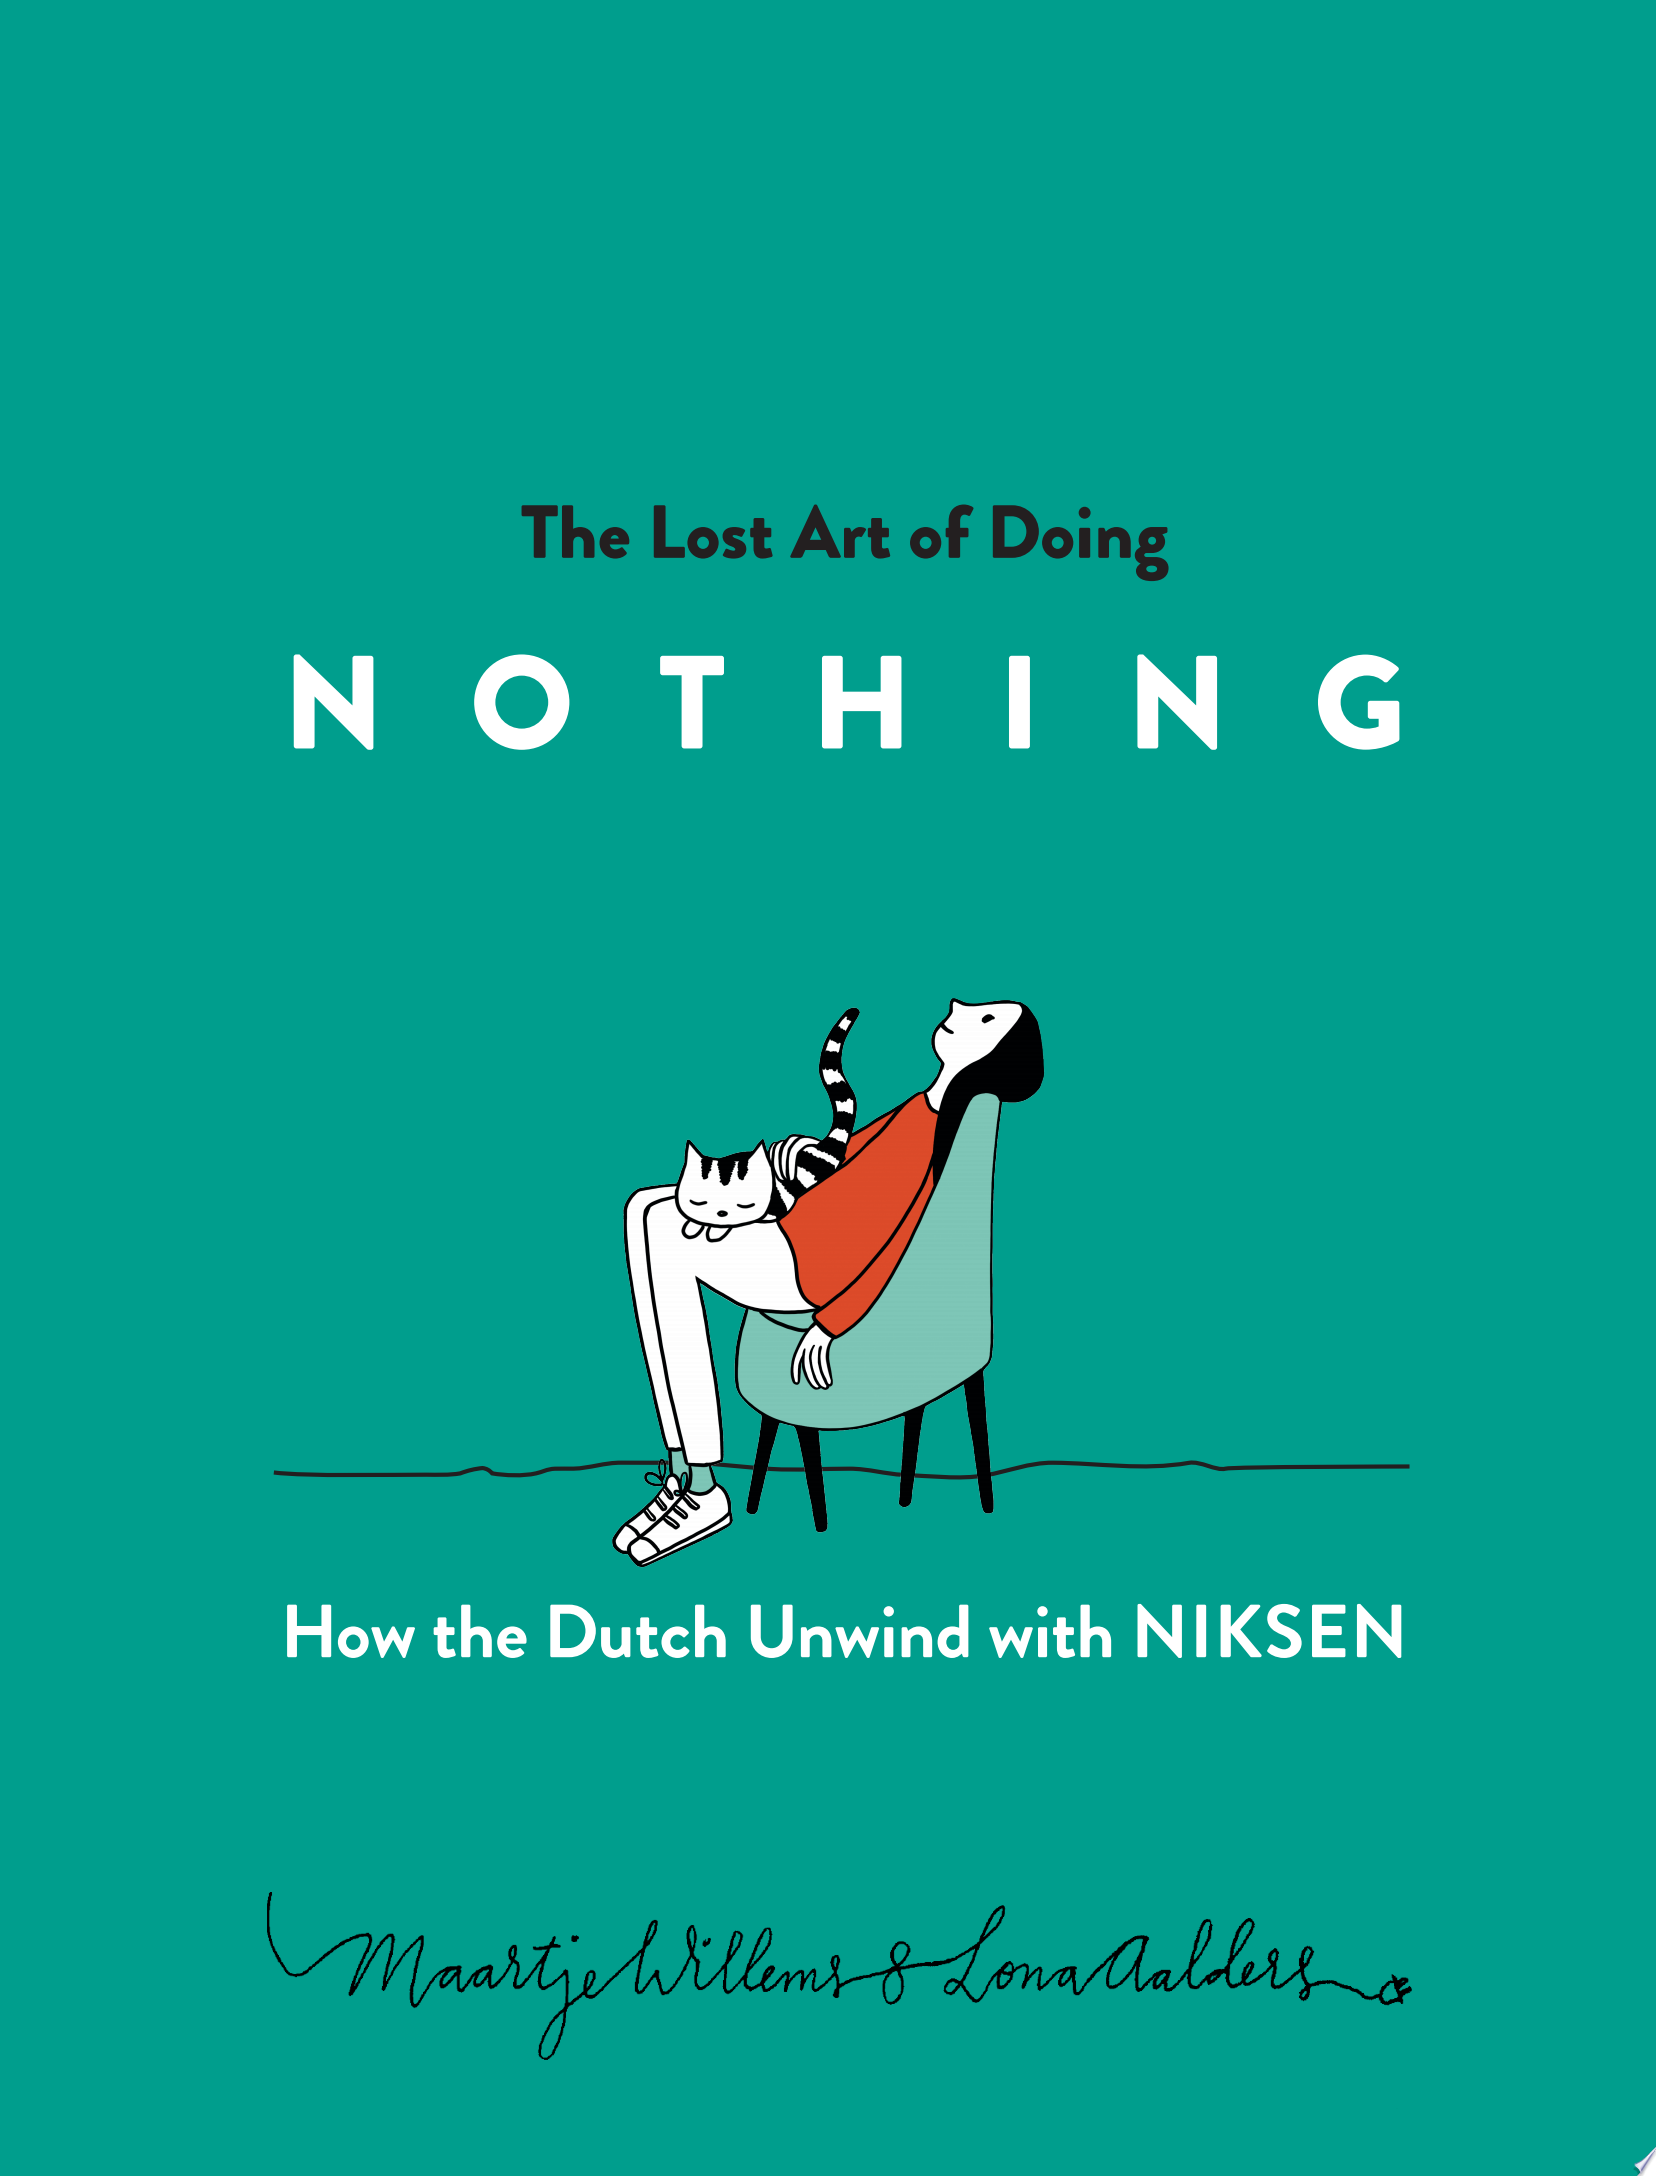 Image for "The Lost Art of Doing Nothing"